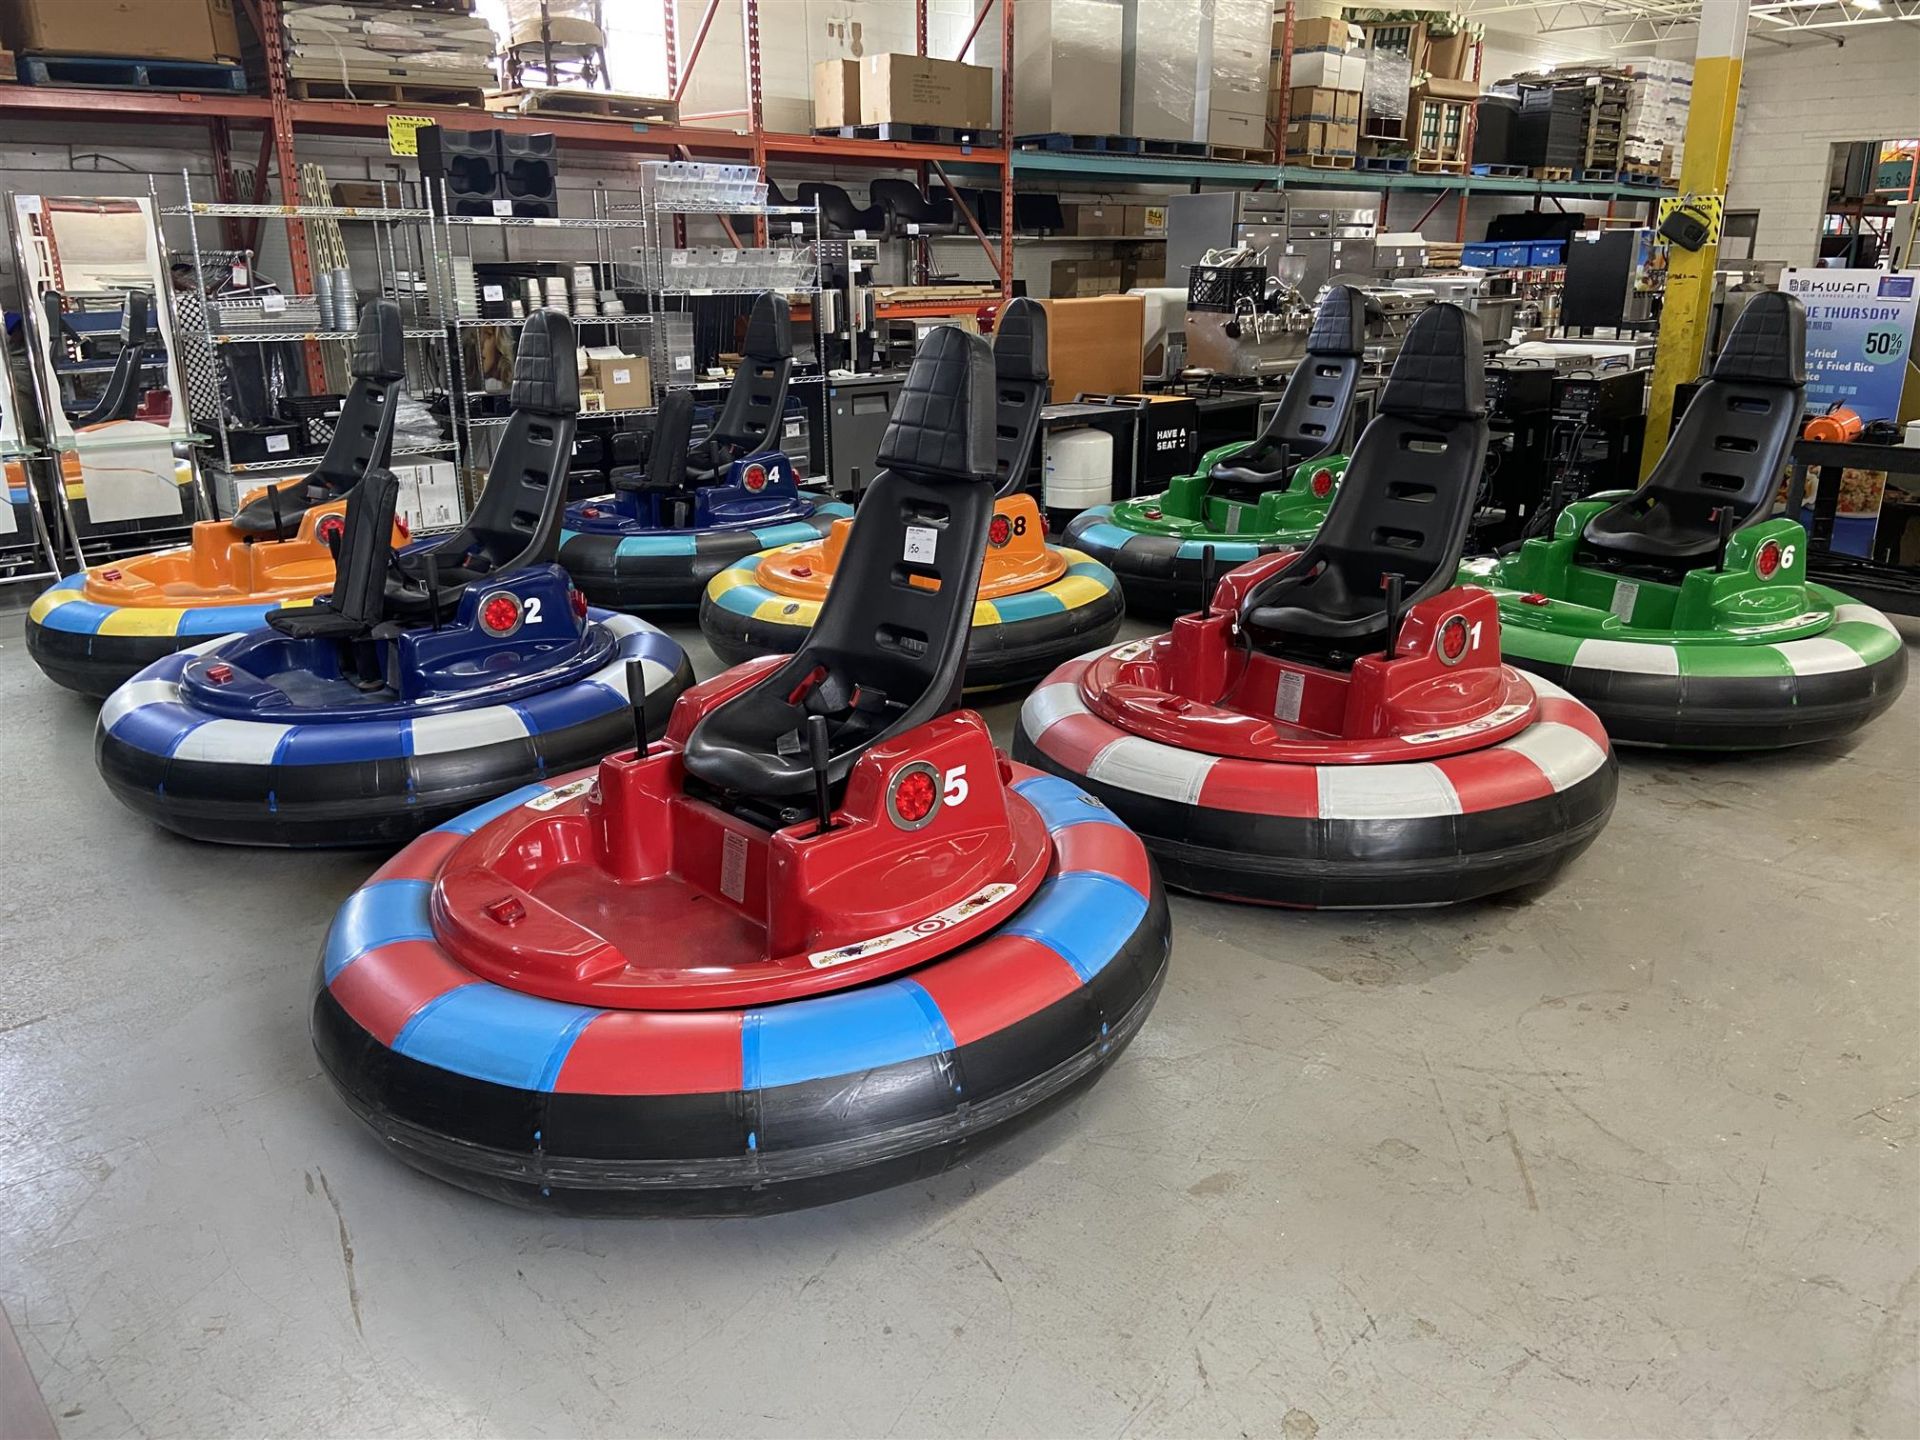 Lot of 8 bumper cars w/ boarders, chargers, inflator, command device & remote: Bumper Cars 8x; - Image 4 of 11